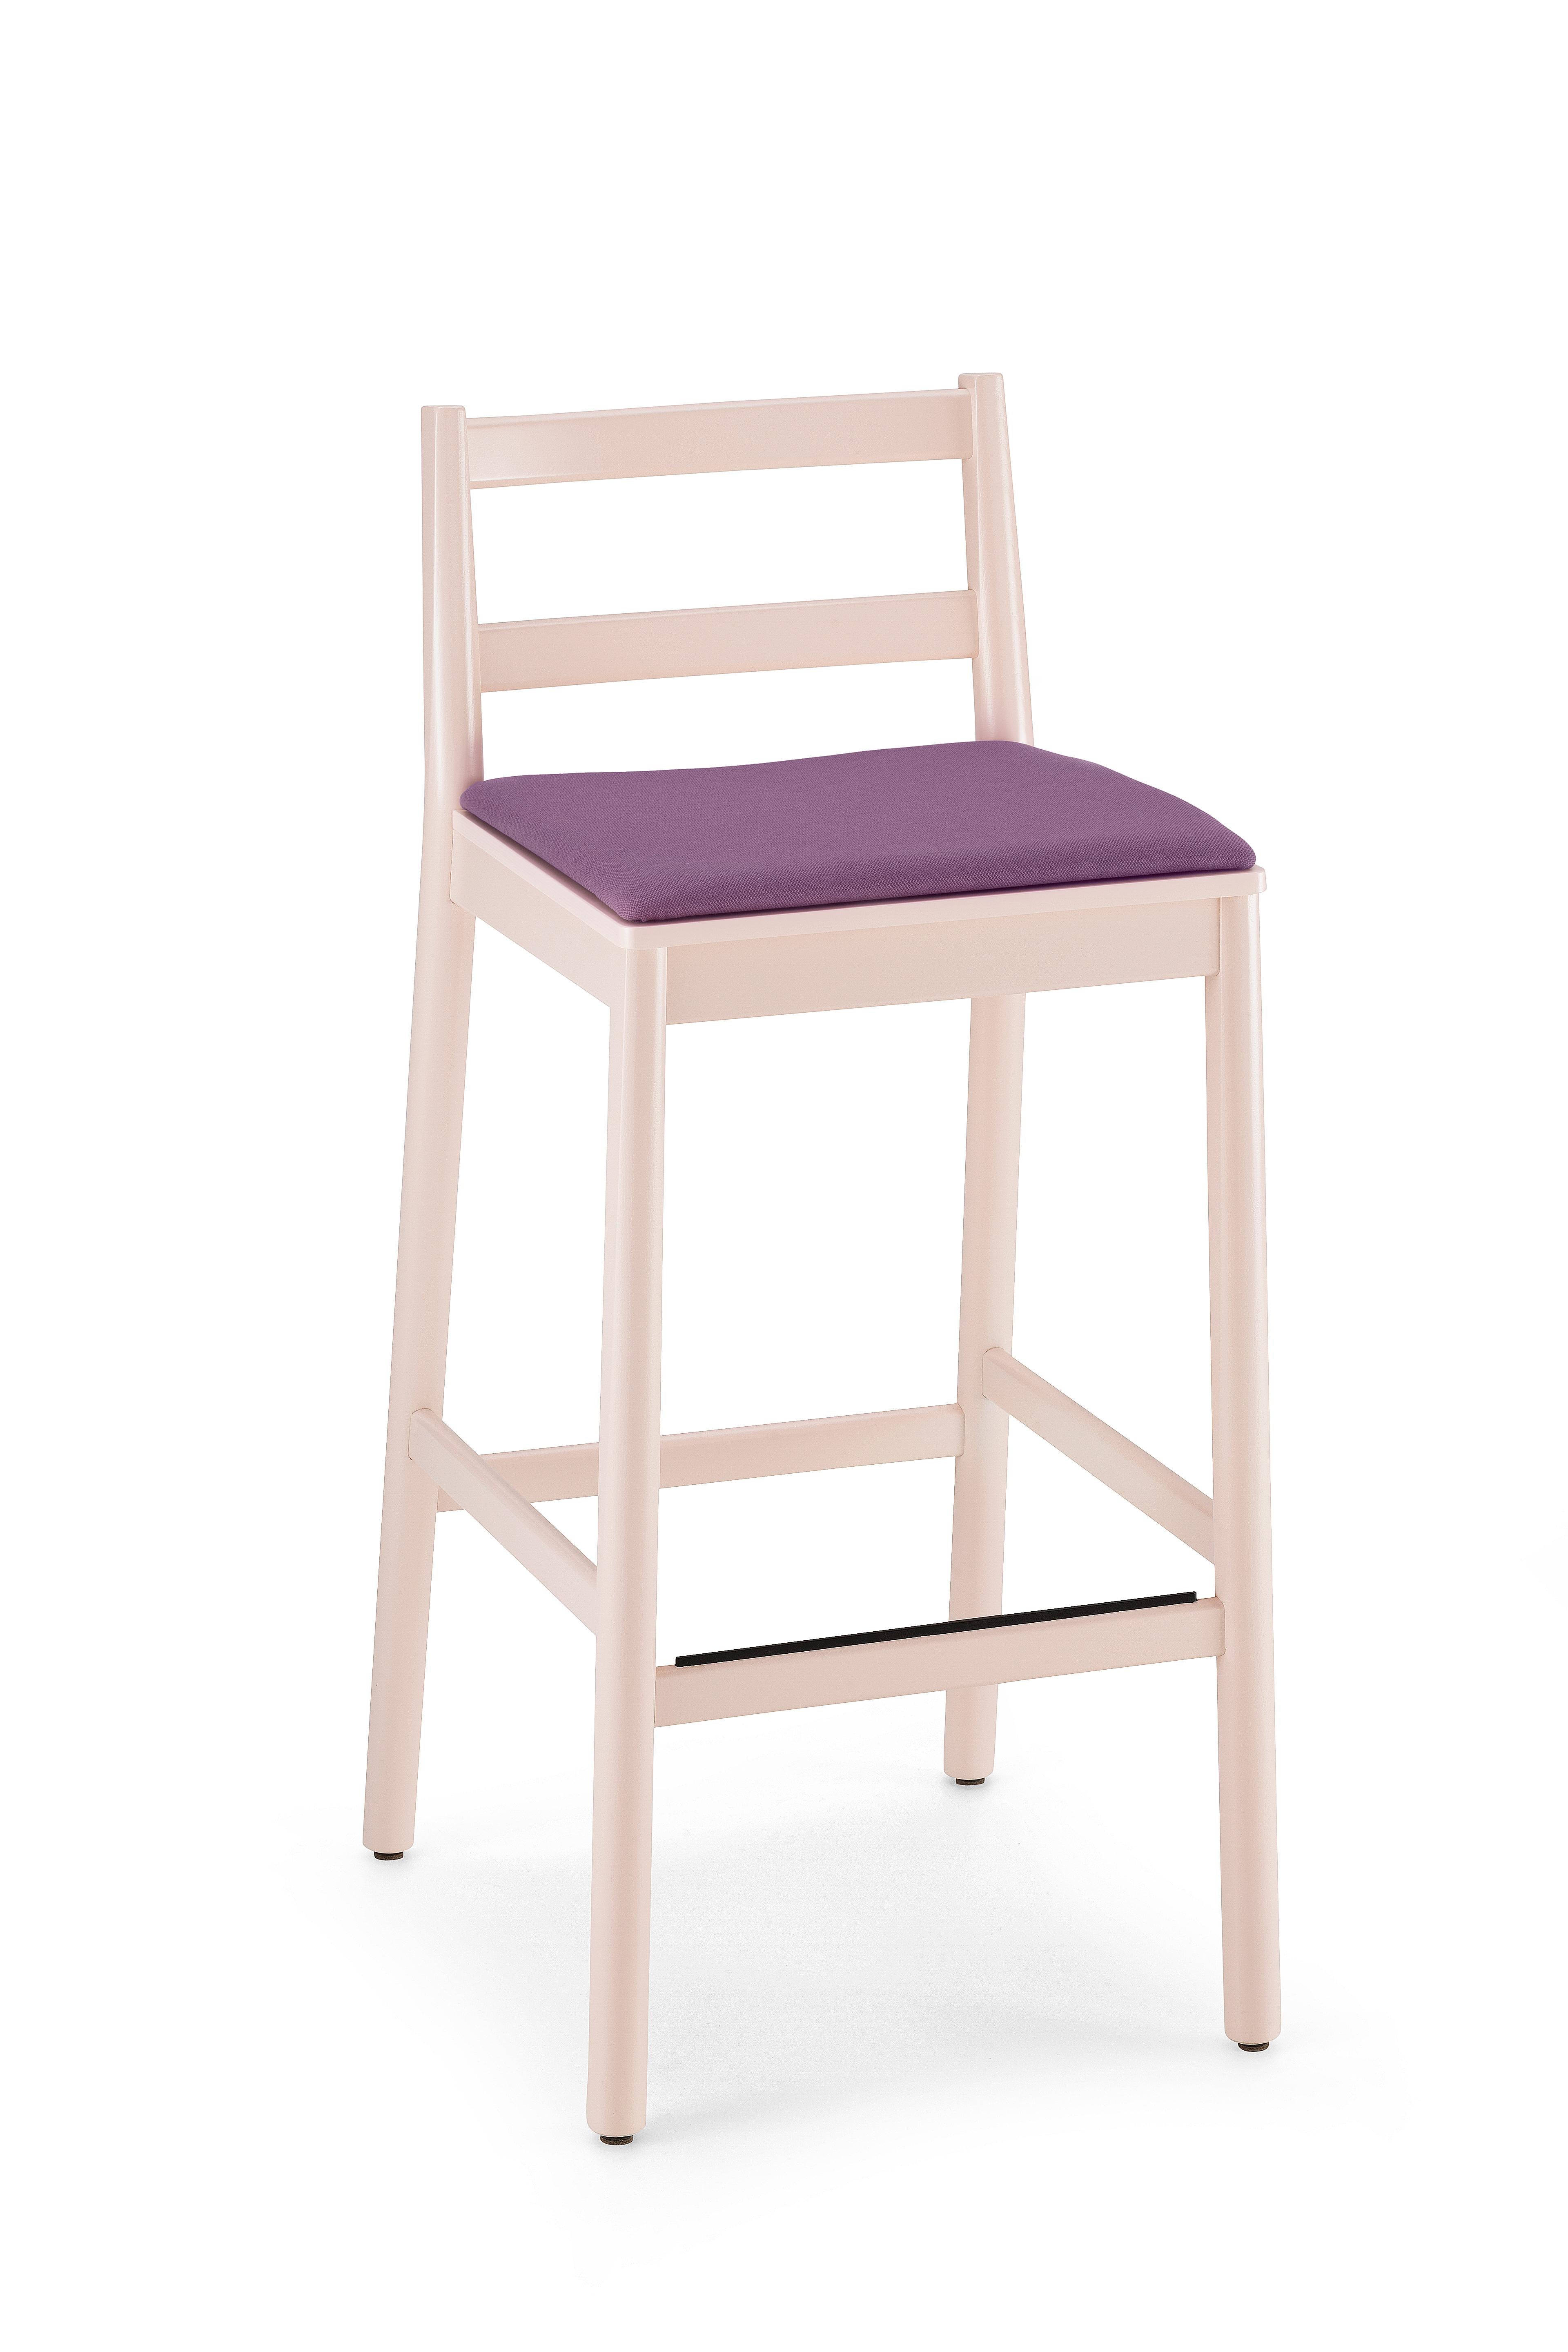 Contemporary Stool Art, Julie 0026-LE Beechwood Painted and Wood Seat by Emilio Nanni For Sale